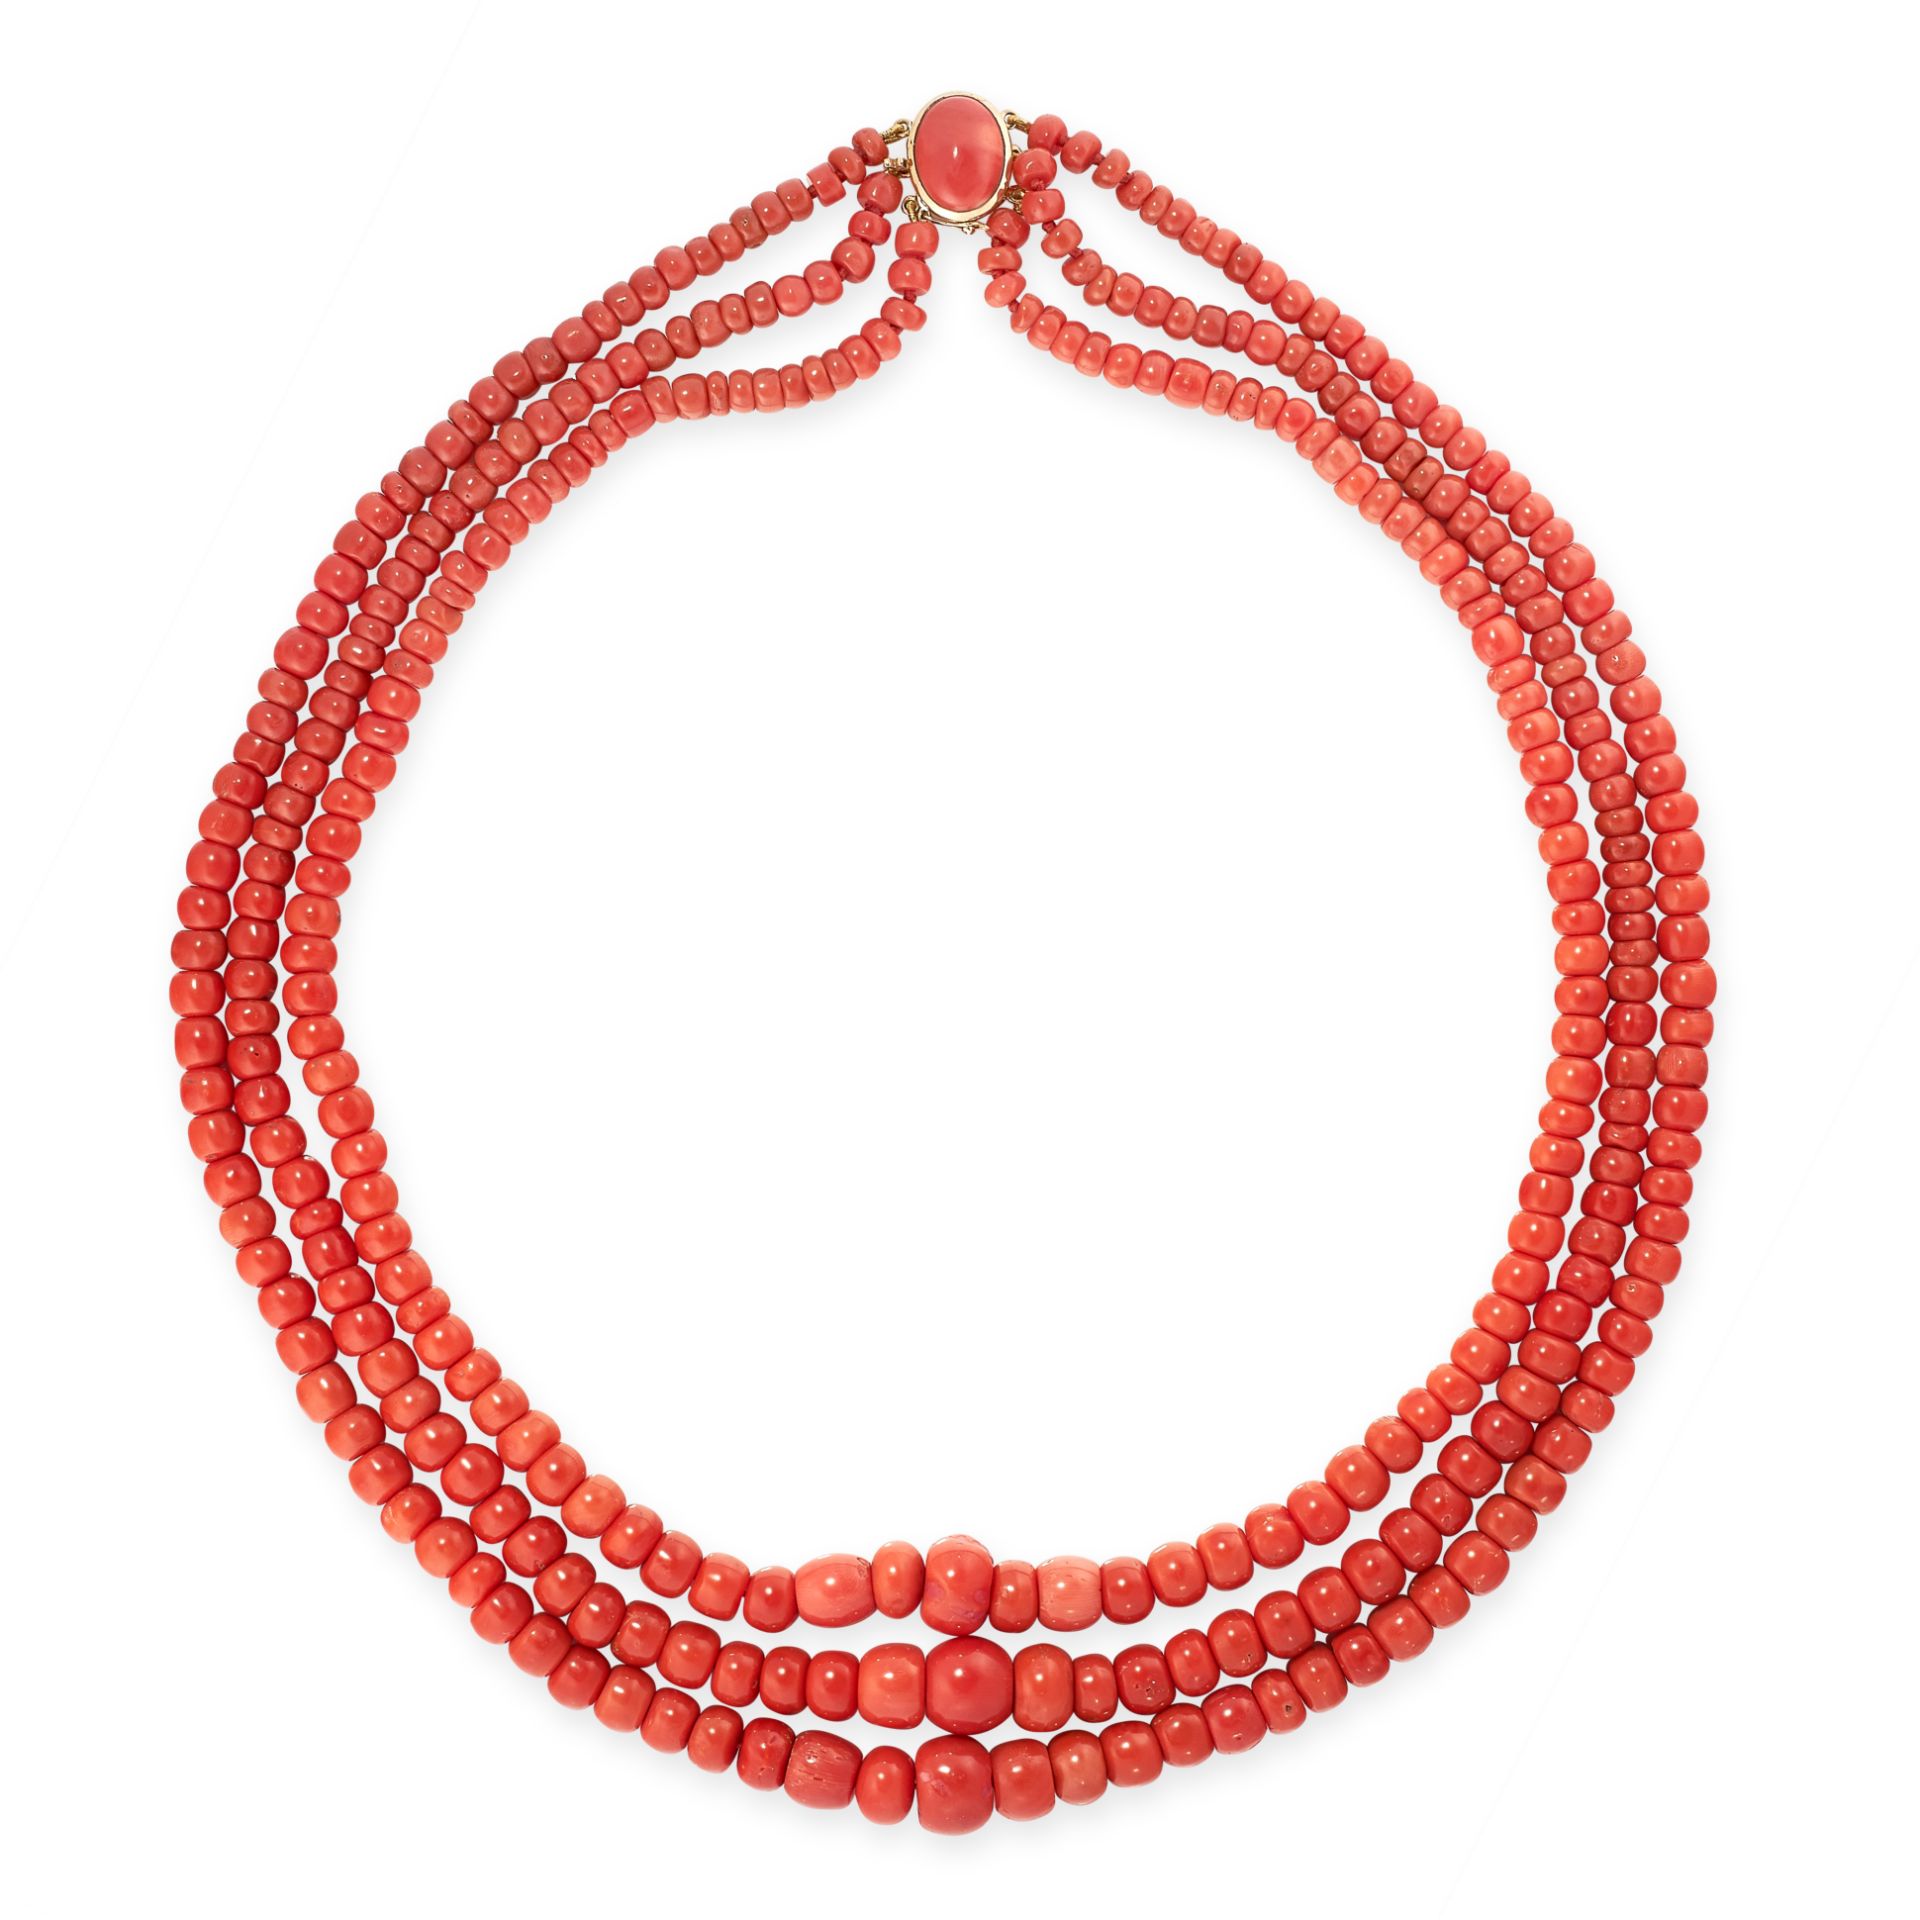 A CORAL BEAD NECKLACE comprising three rows of graduated coral beads ranging from 6.1mm-13.3mm, with